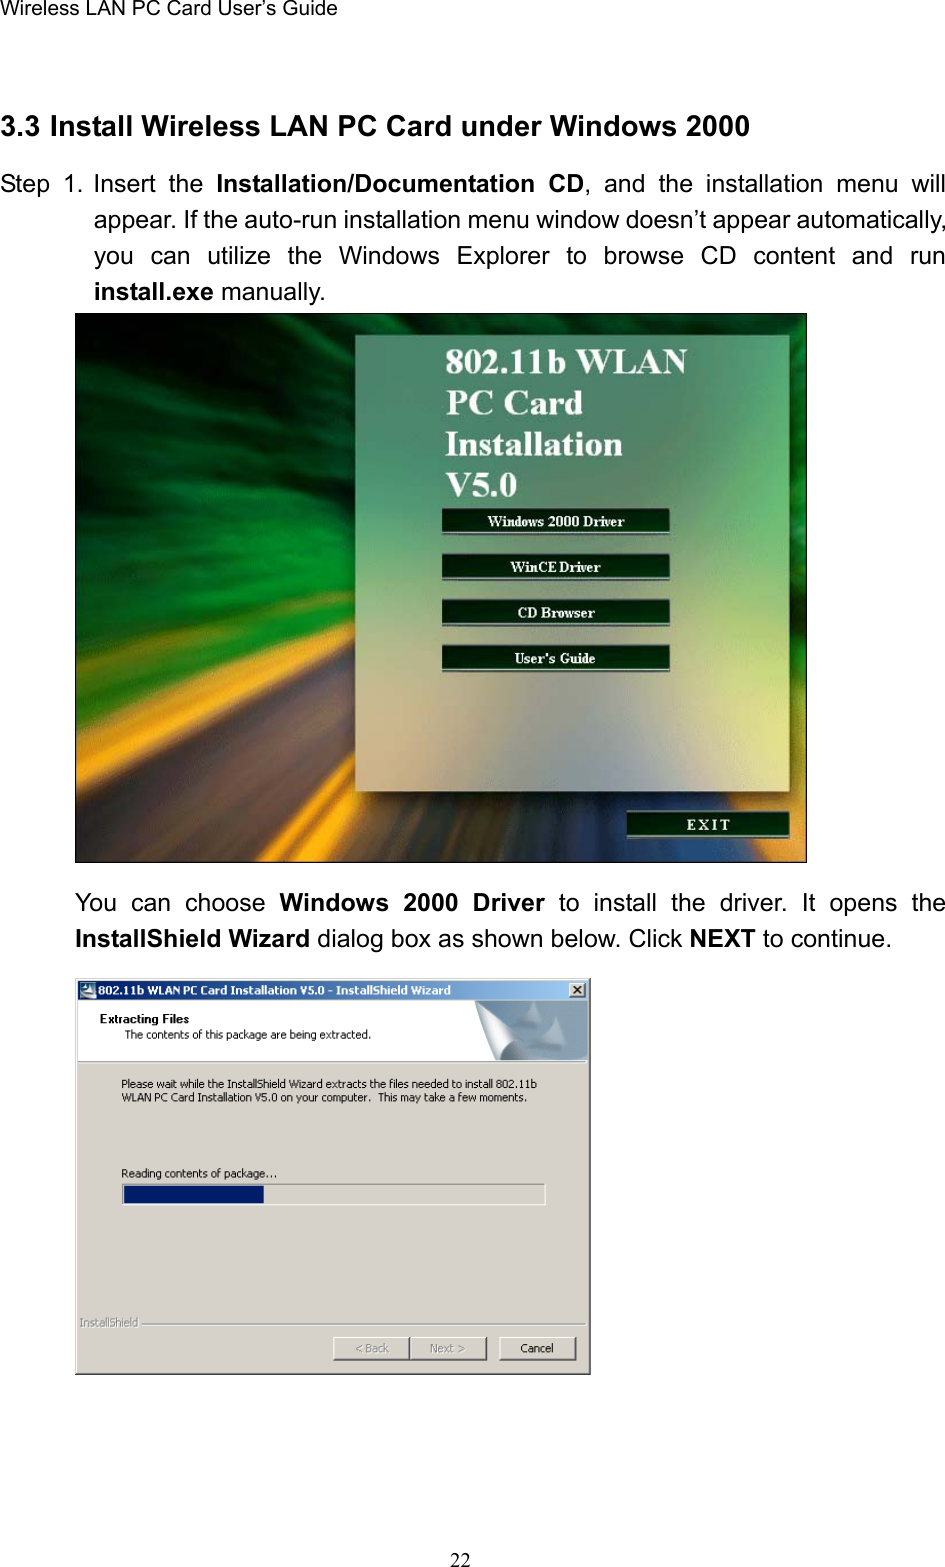 Wireless LAN PC Card User’s Guide223.3 Install Wireless LAN PC Card under Windows 2000Step 1. Insert the Installation/Documentation CD, and the installation menu willappear. If the auto-run installation menu window doesn’t appear automatically,you can utilize the Windows Explorer to browse CD content and runinstall.exe manually.You can choose Windows 2000 Driver to install the driver. It opens the       InstallShield Wizard dialog box as shown below. Click NEXT to continue.